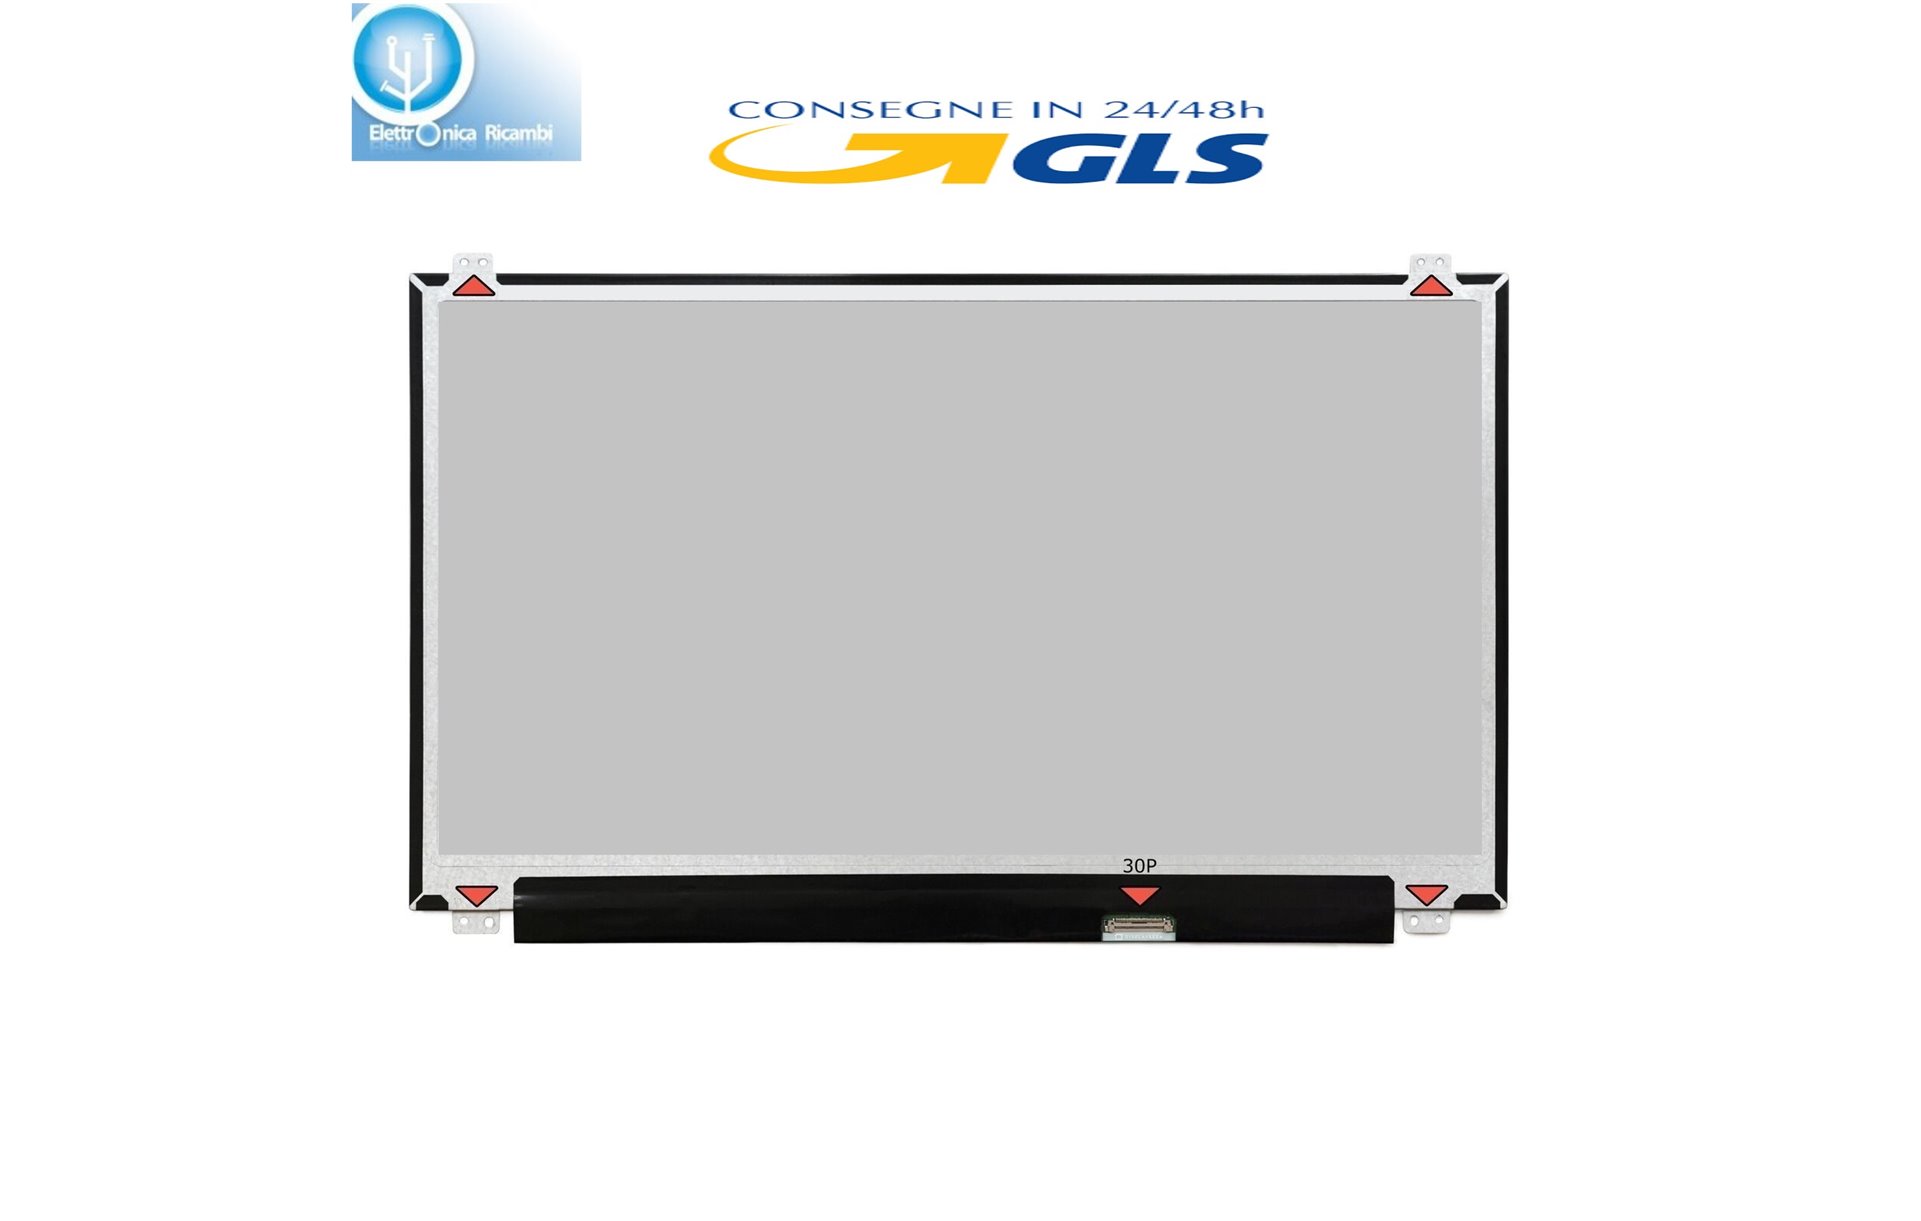 DISPLAY LCD PACKARDBELL EASYNOTE ENTG81BA-C717 15.6 1366x768 LED 30 pin